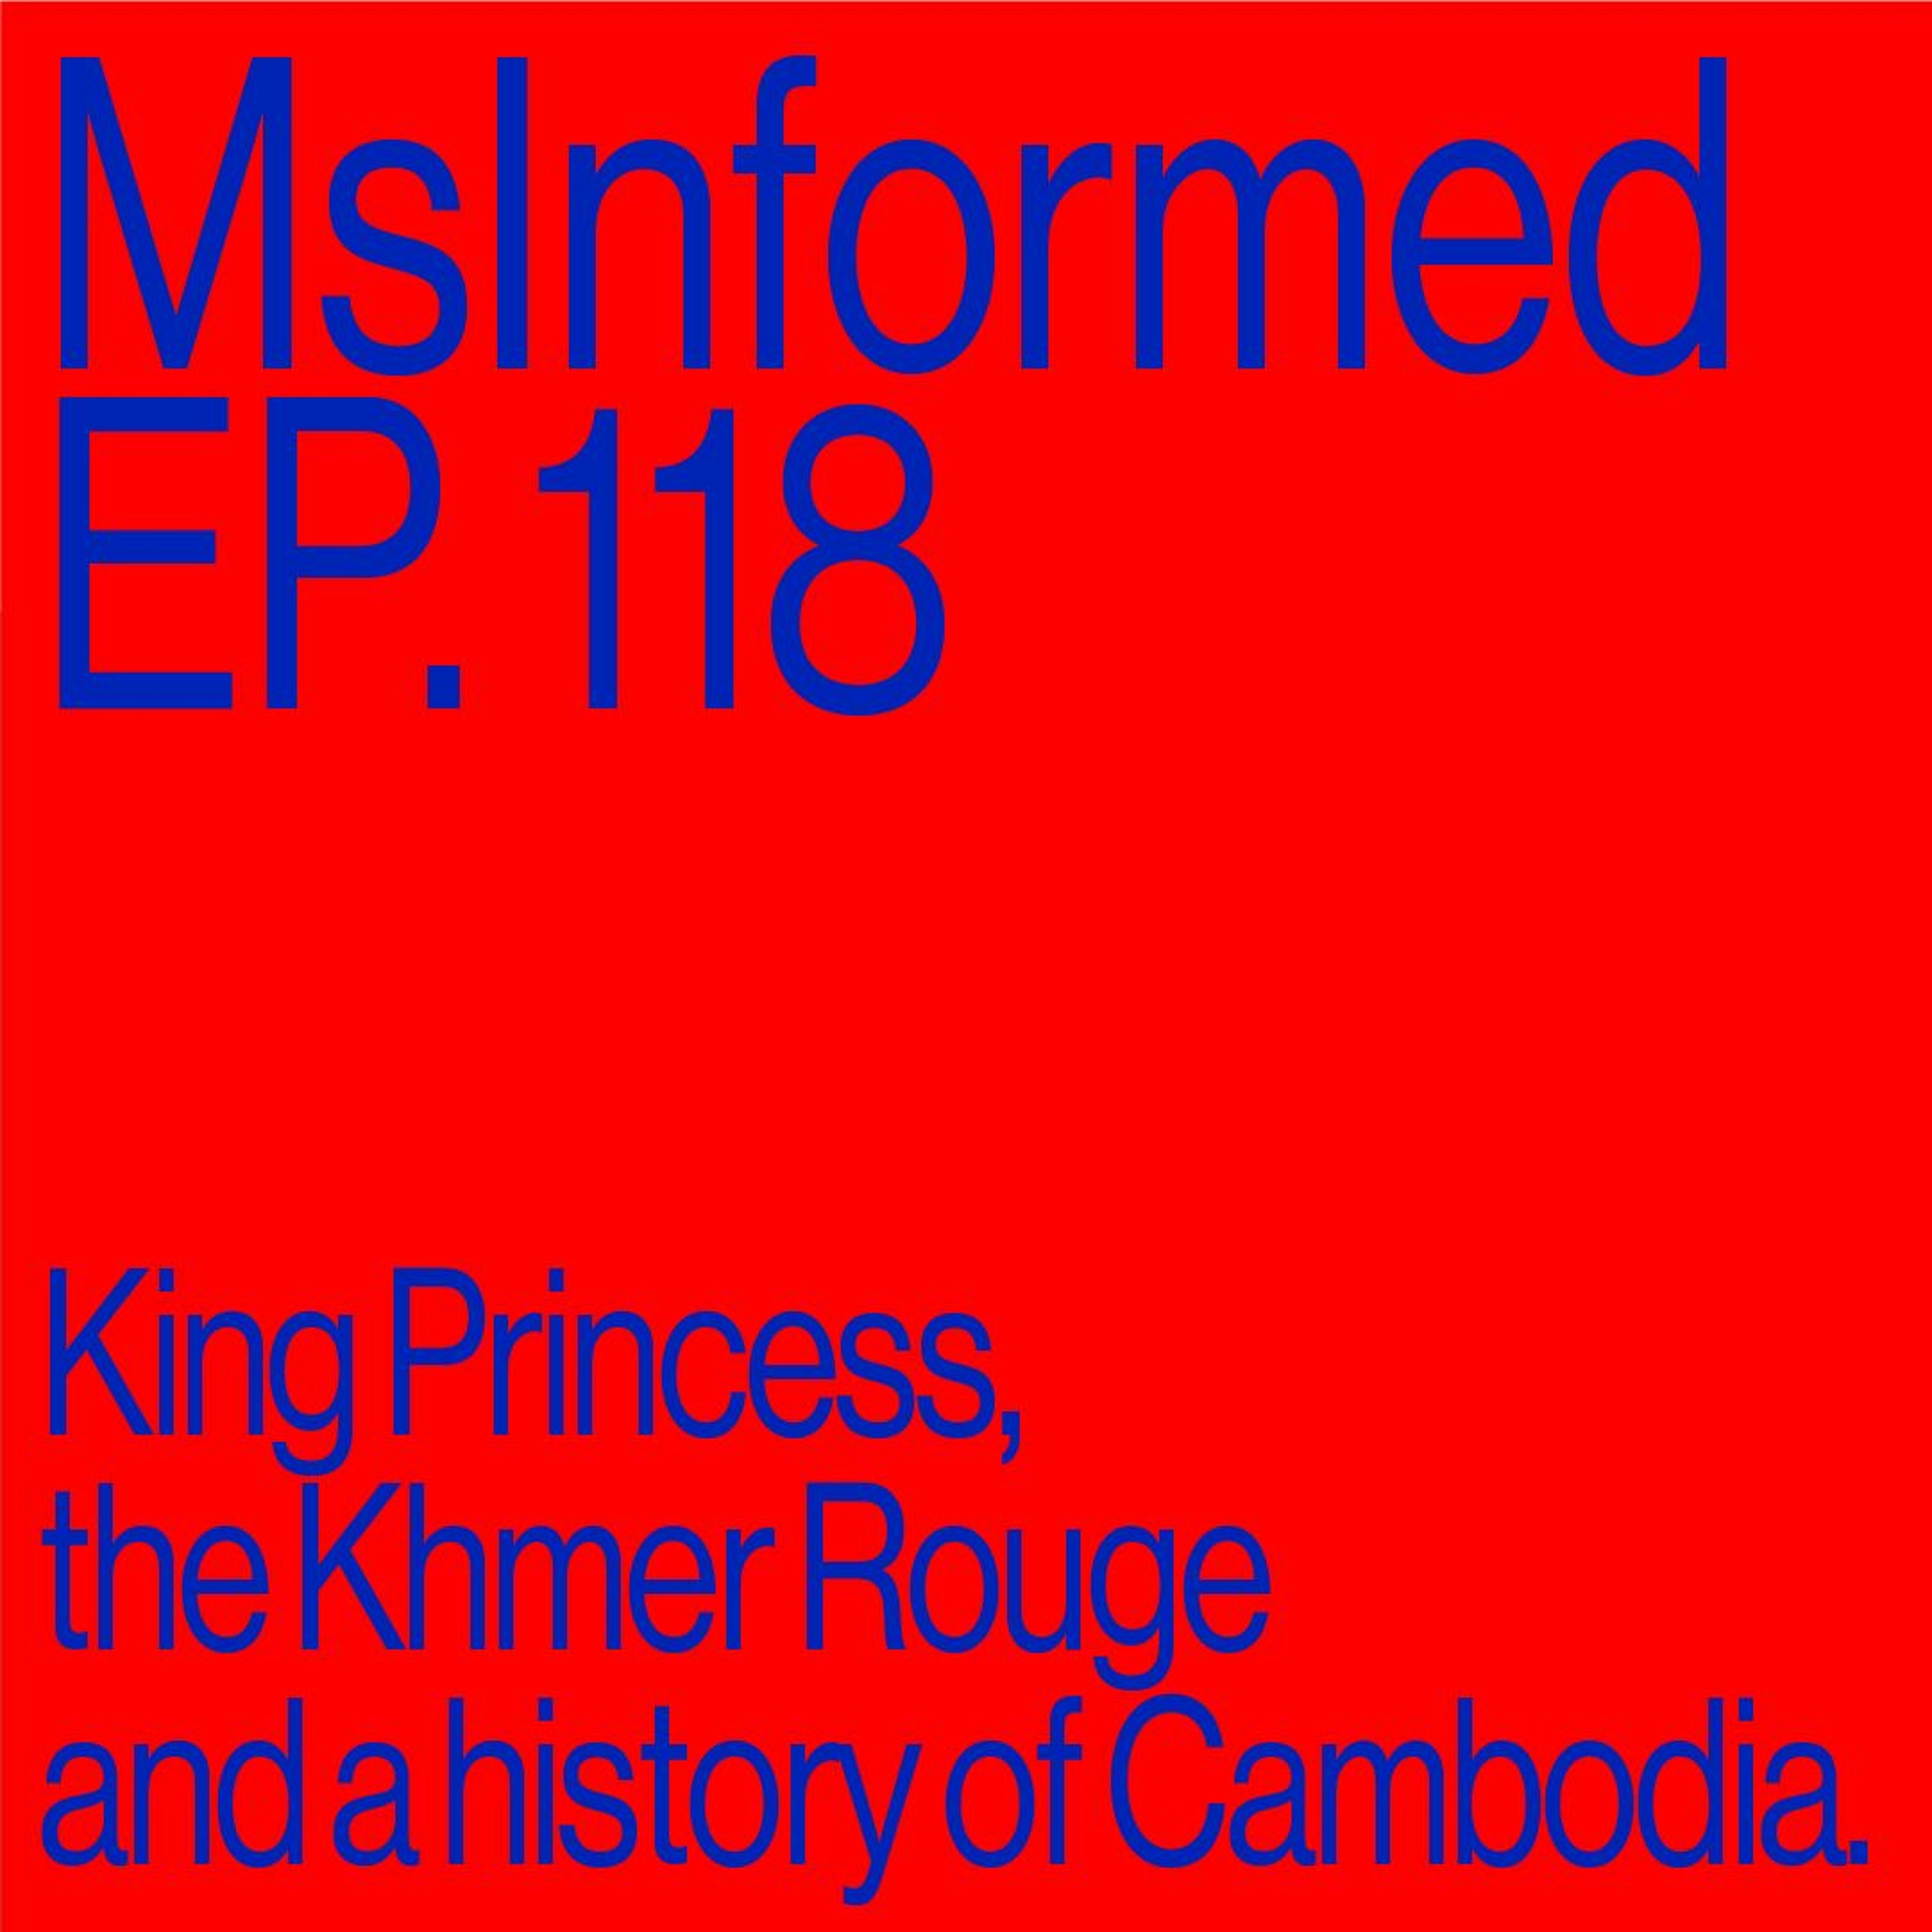 Episode 118: King Princess, the Khmer Rouge and a history of Cambodia